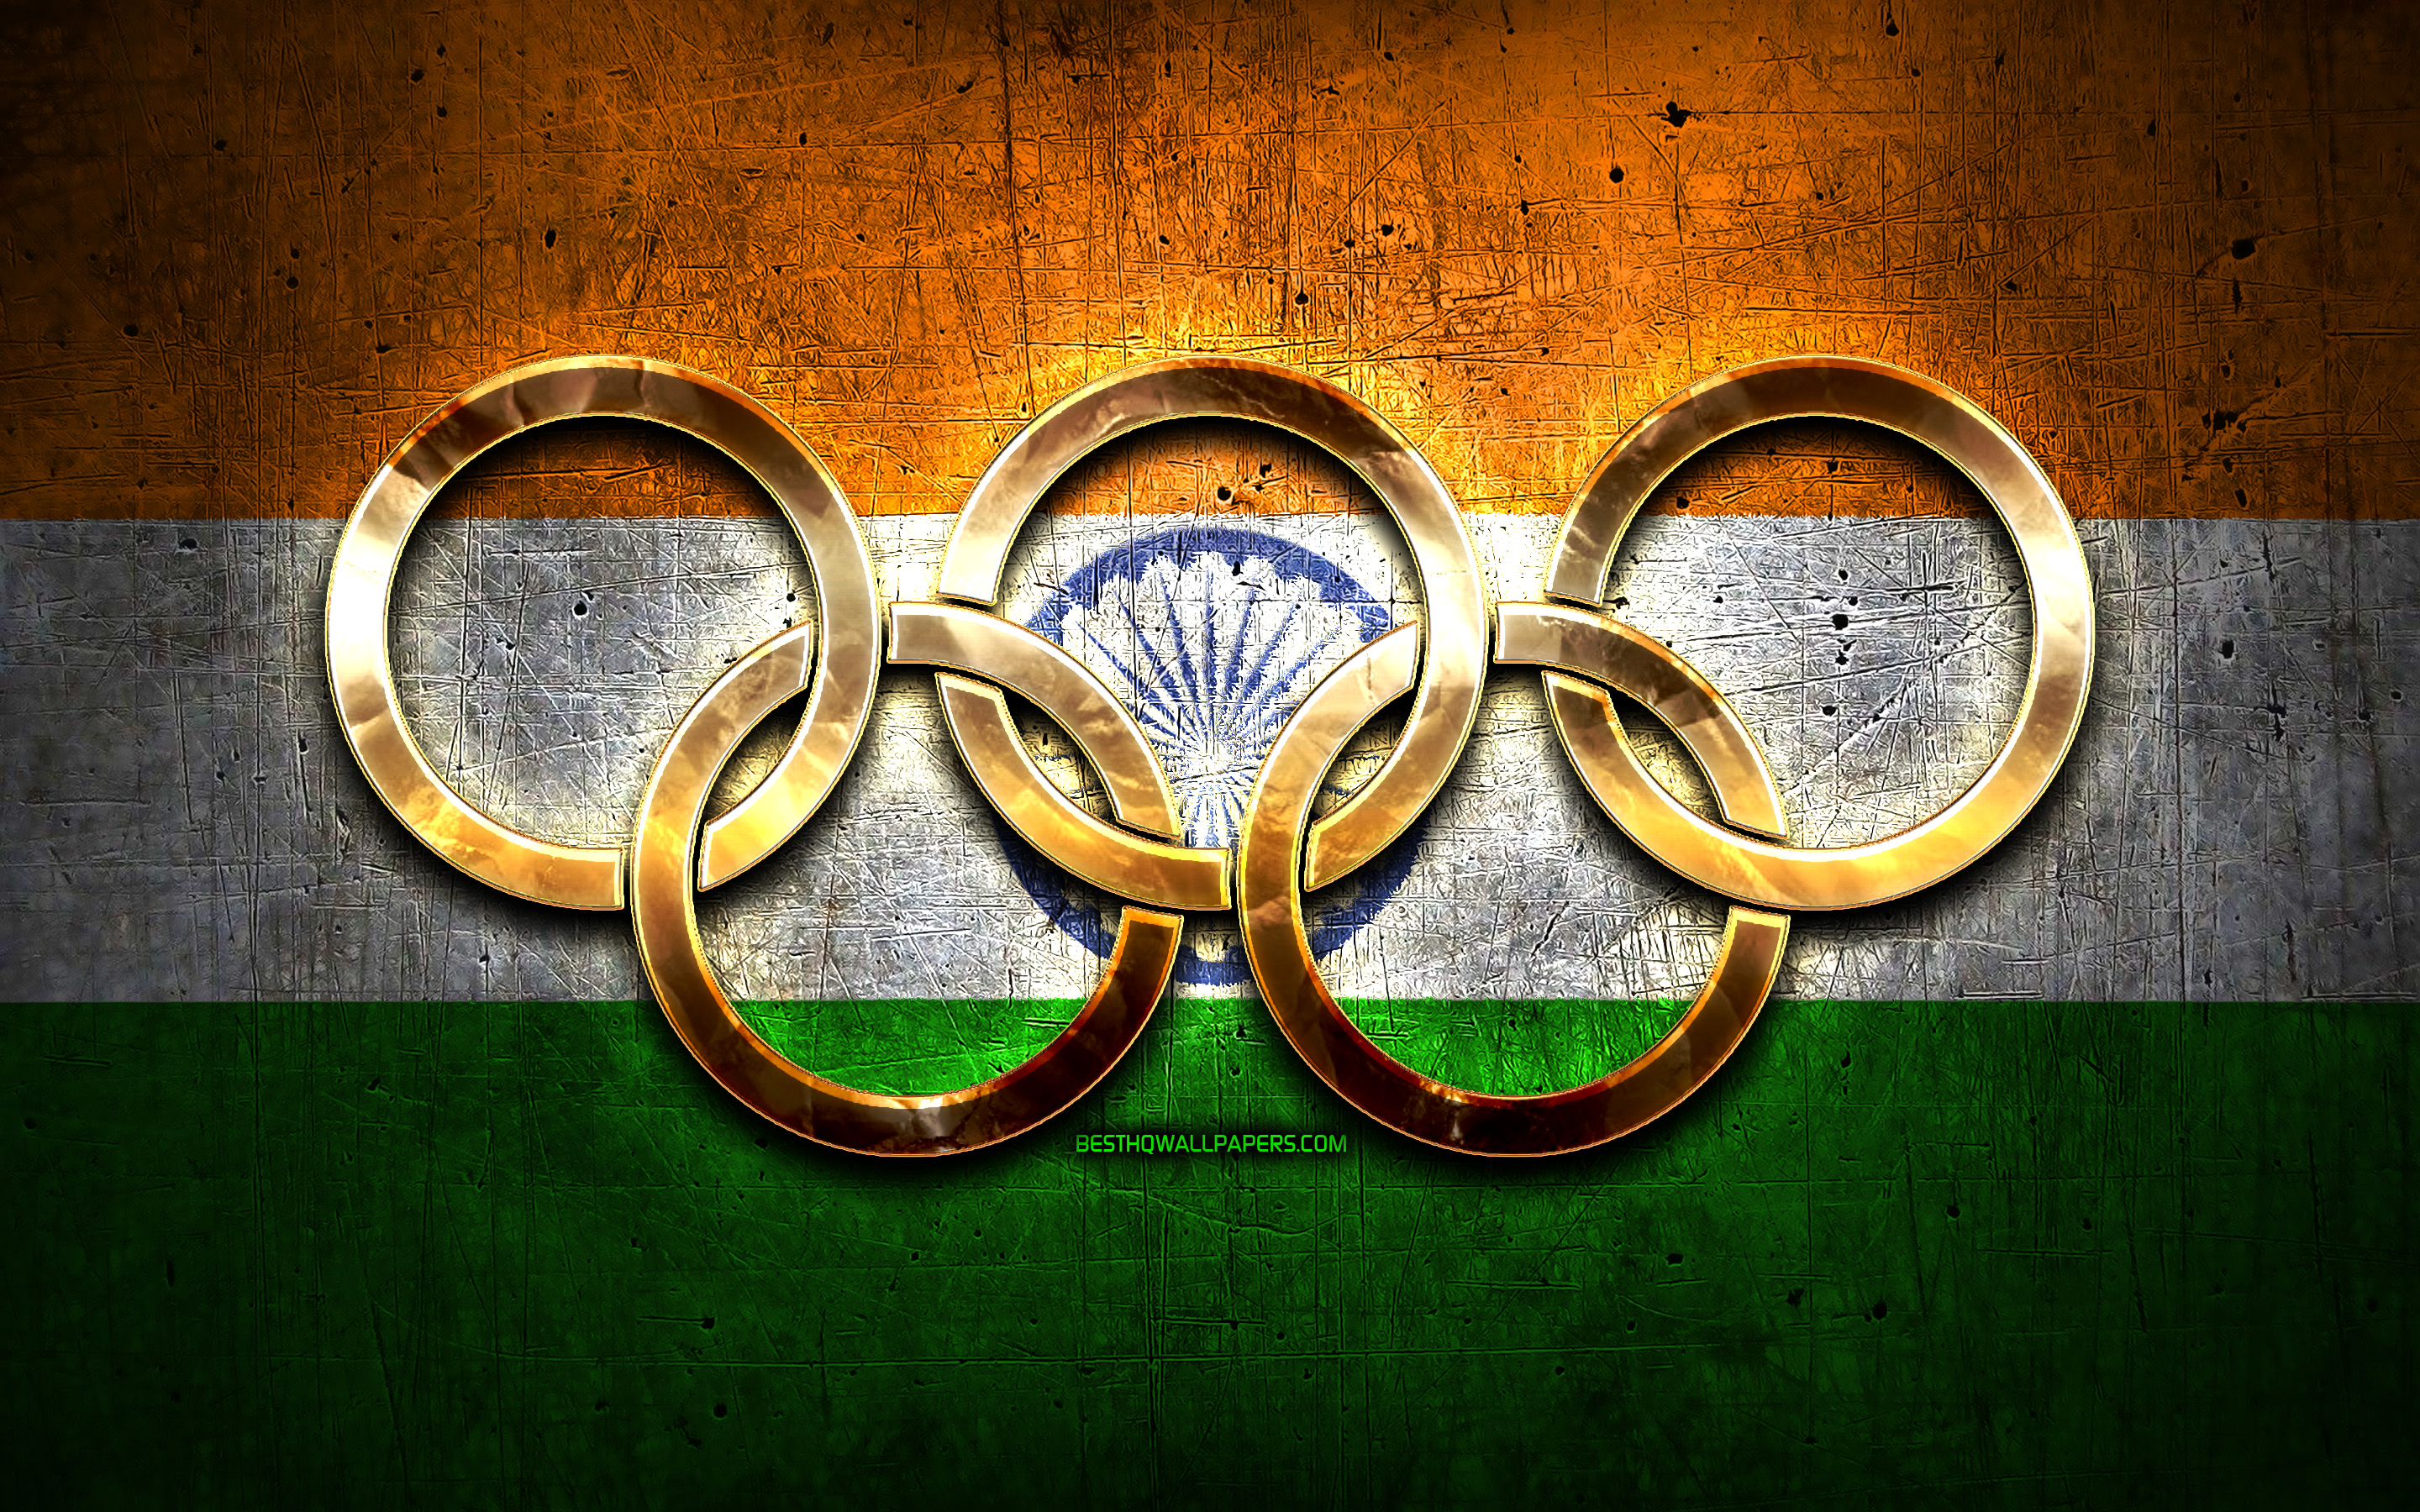 Download wallpaper Indian olympic team, golden olympic rings, India at the Olympics, creative, Indian flag, metal background, India Olympic Team, flag of India for desktop with resolution 2880x1800. High Quality HD picture